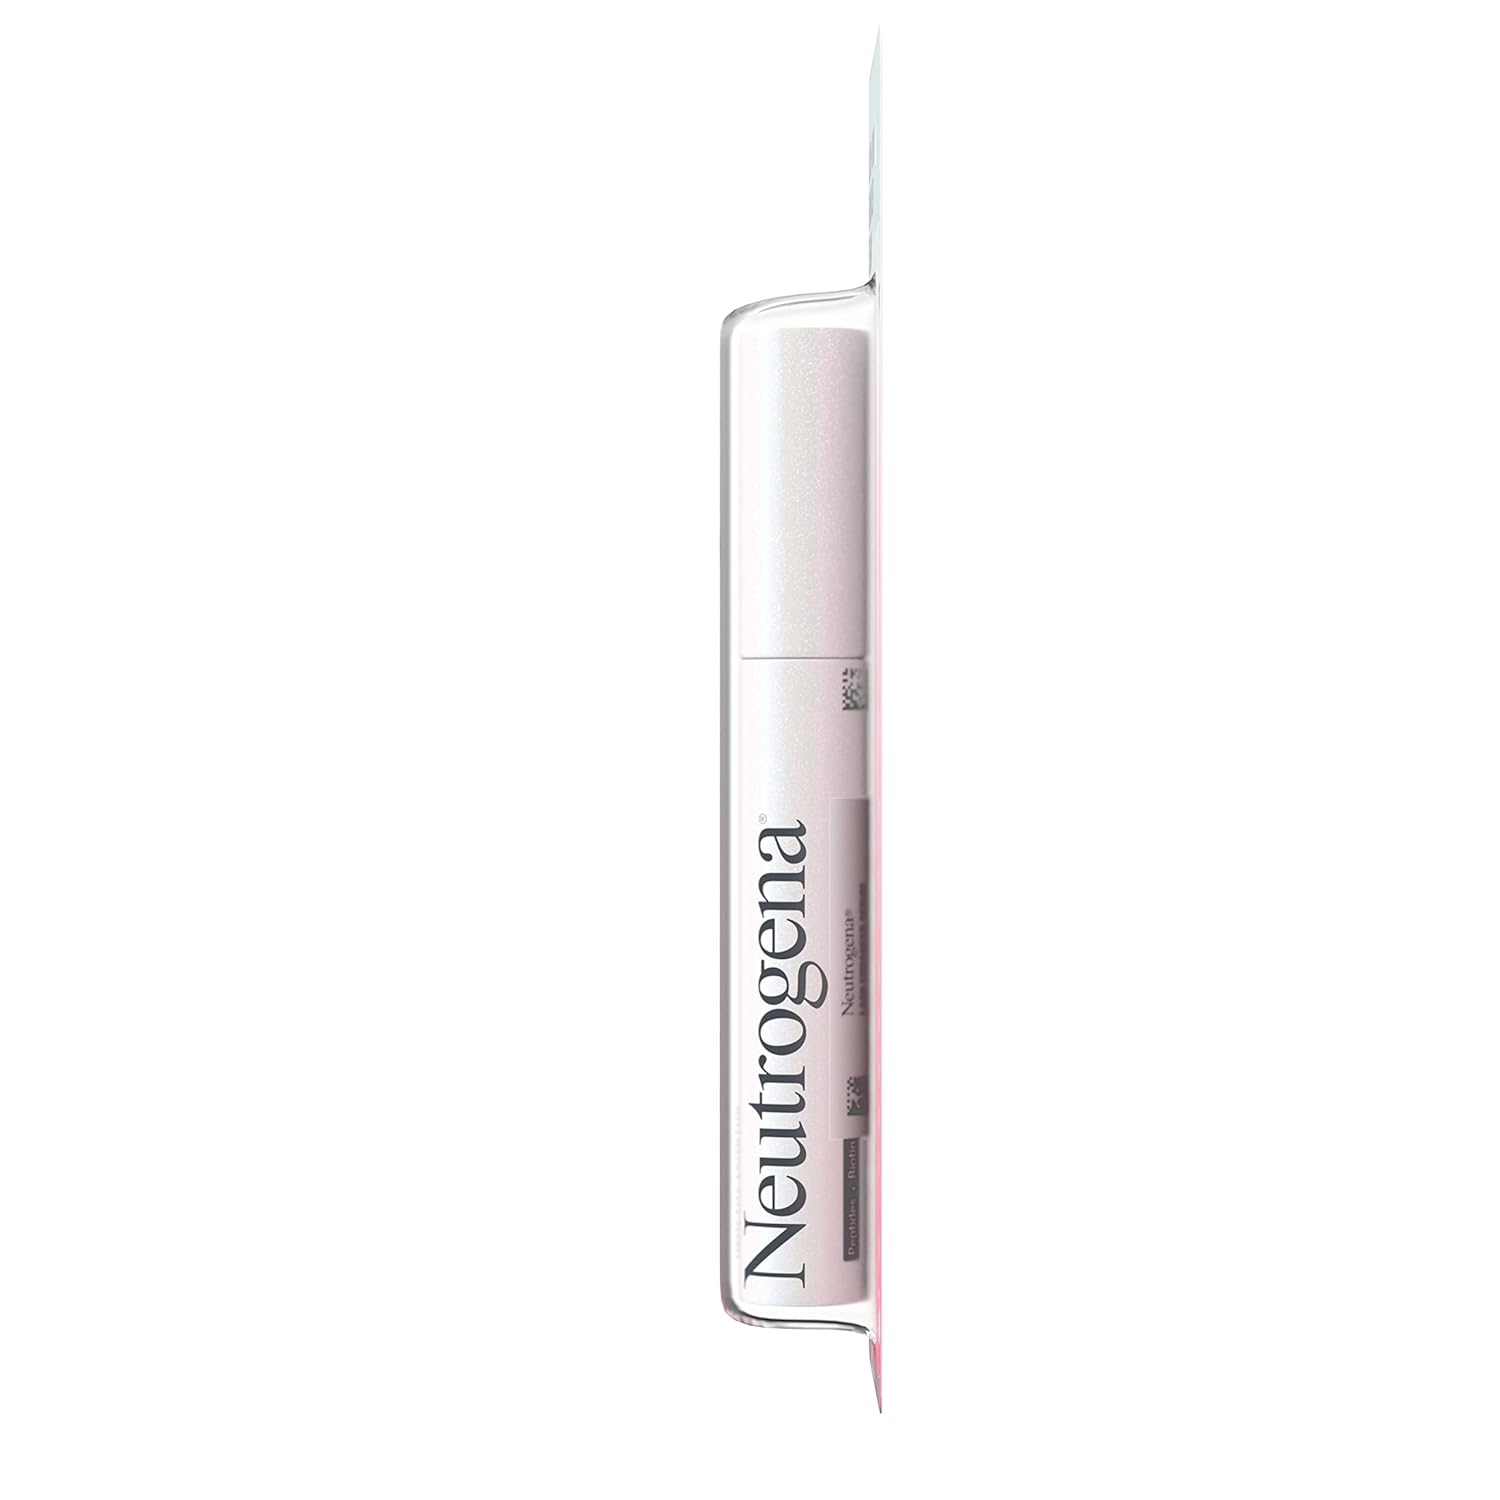 Neutrogena Healthy Lash + Brow Enhancer Serum For Unisex Adult Formulated with Biotin & Peptides; Nourishing & Conditioning Serum to Enhance the Look of Lashes & Eyebrows, 0.08 oz : Beauty & Personal Care